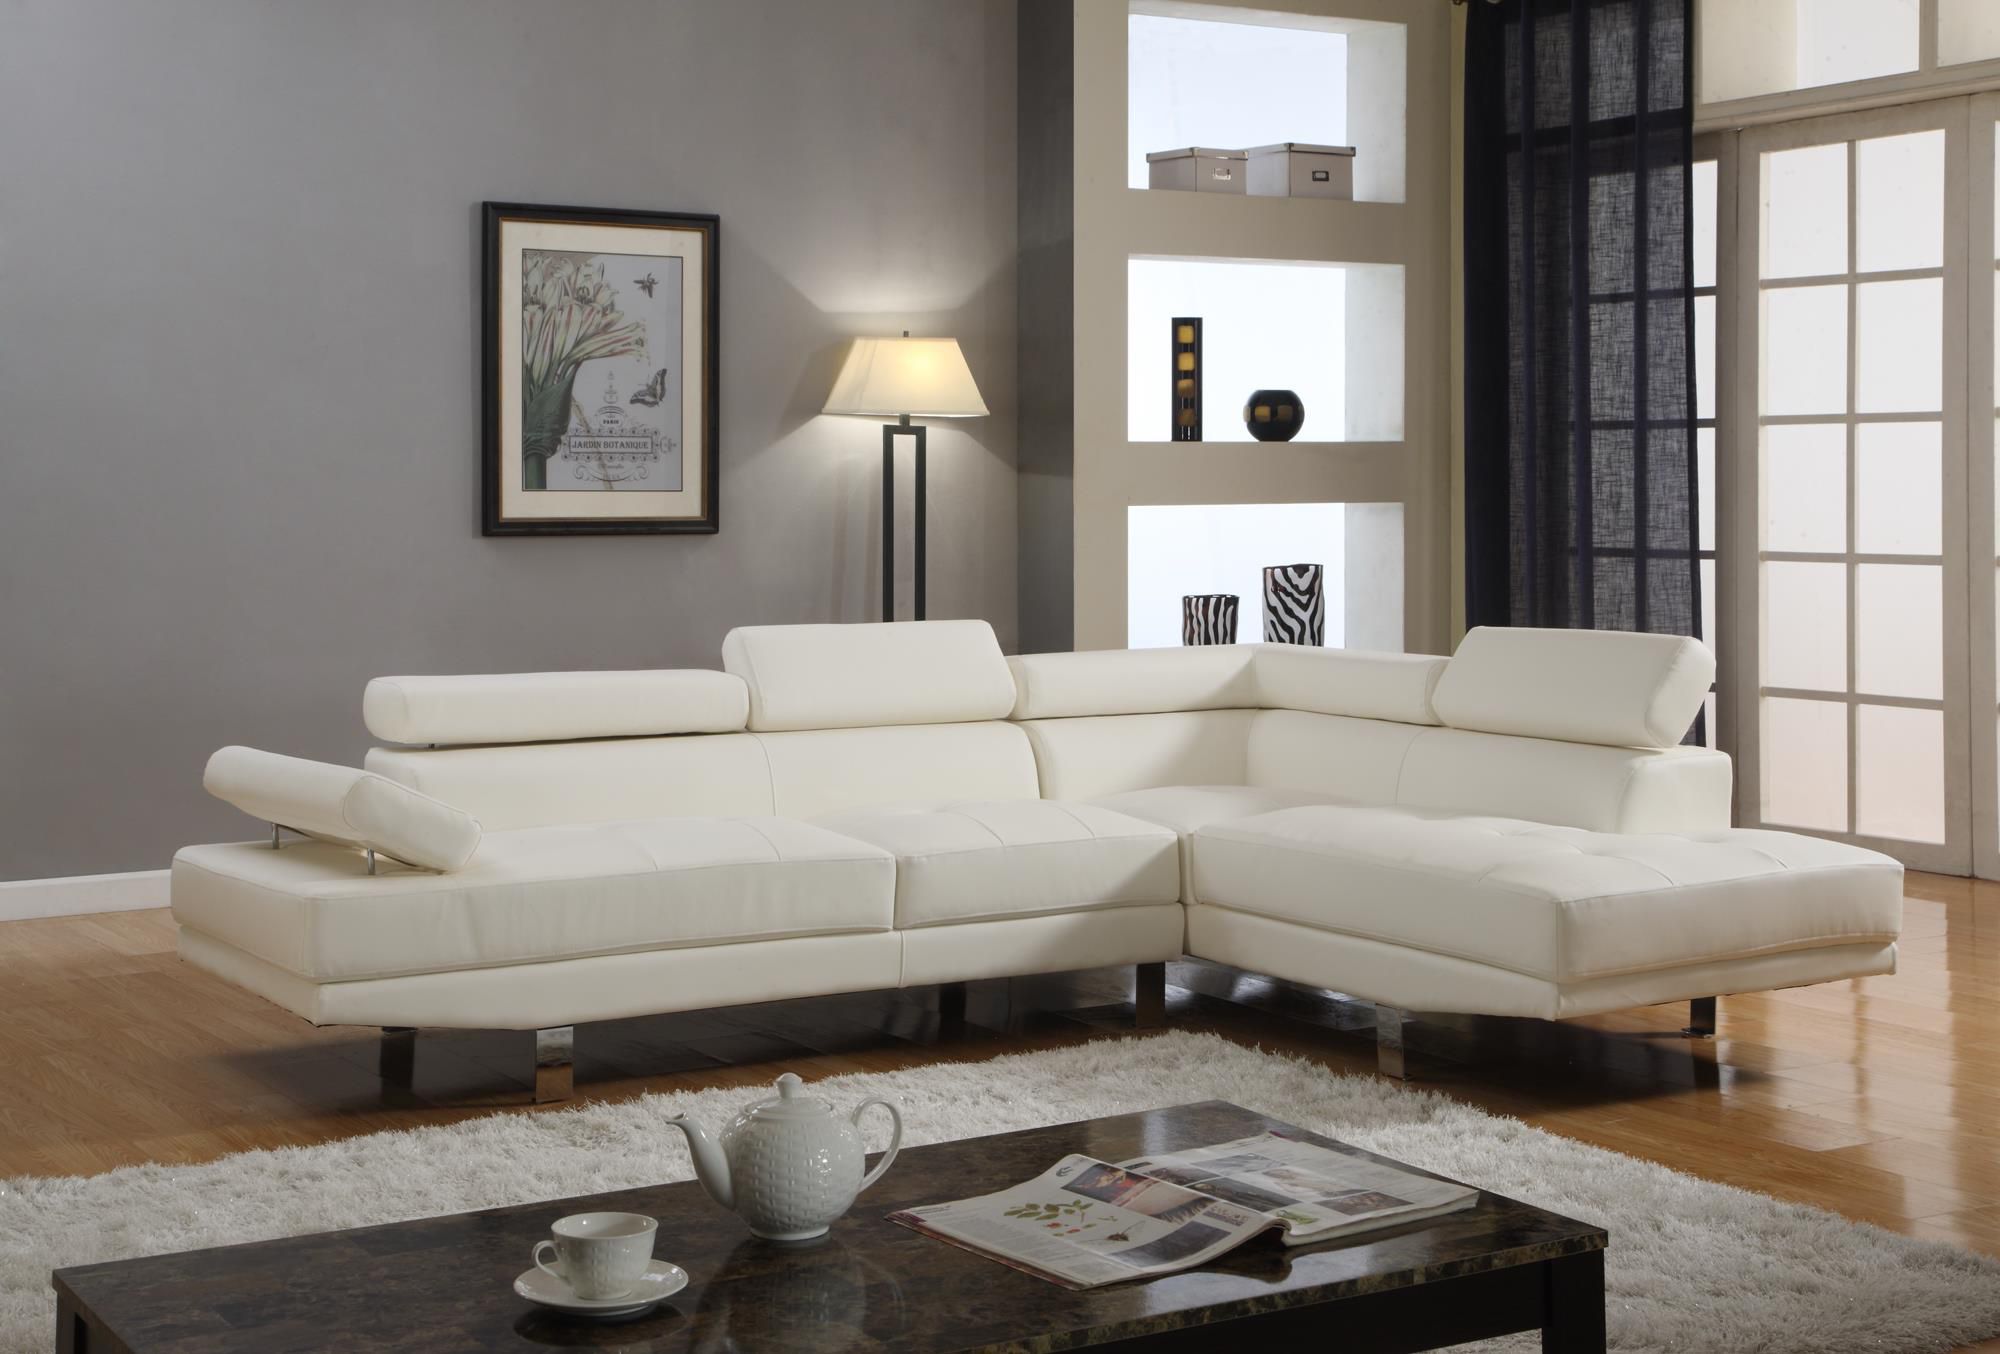 🔥 Special Sales 🔥 SECTIONAL & SOFA 🛋️ - Come In Box 📦 - Free Delivery 🚚 Today To Reasonable Distance 